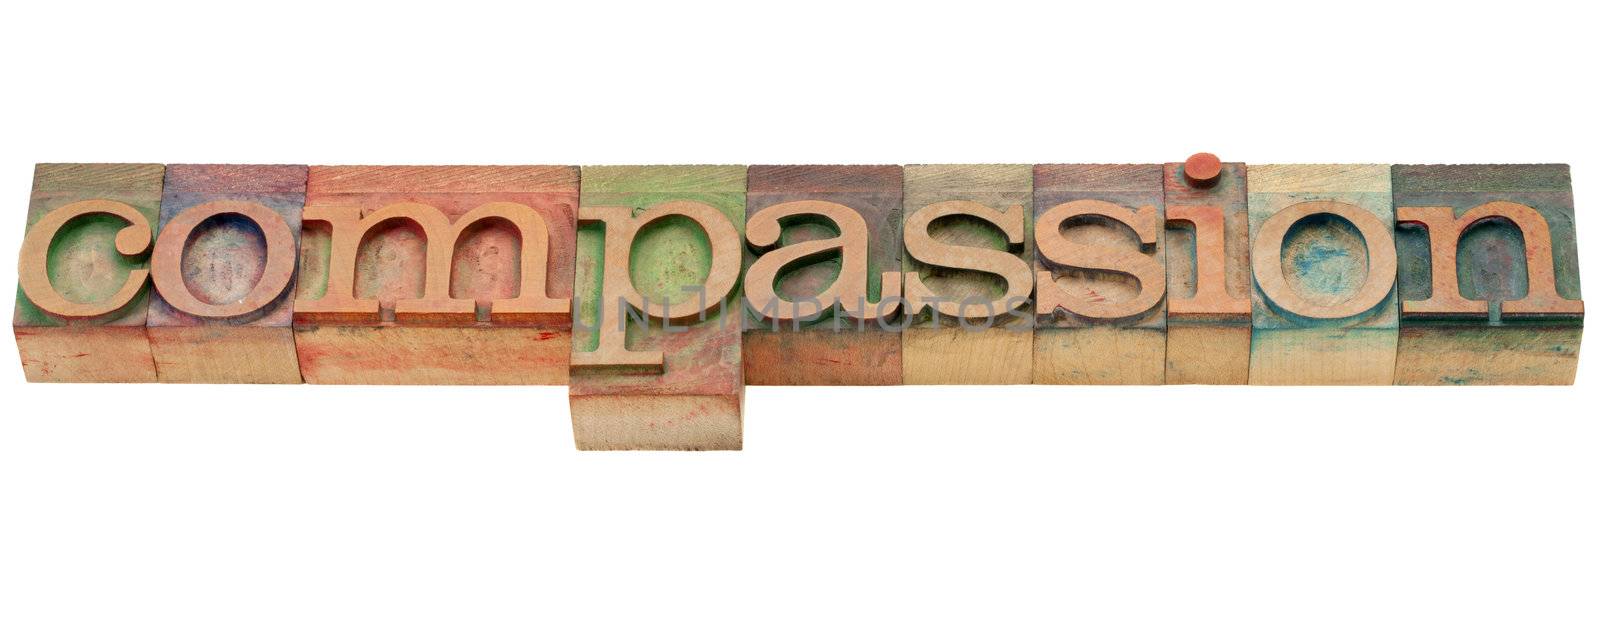 compassion  - isolated word in vintage wood letterpress printing blocks